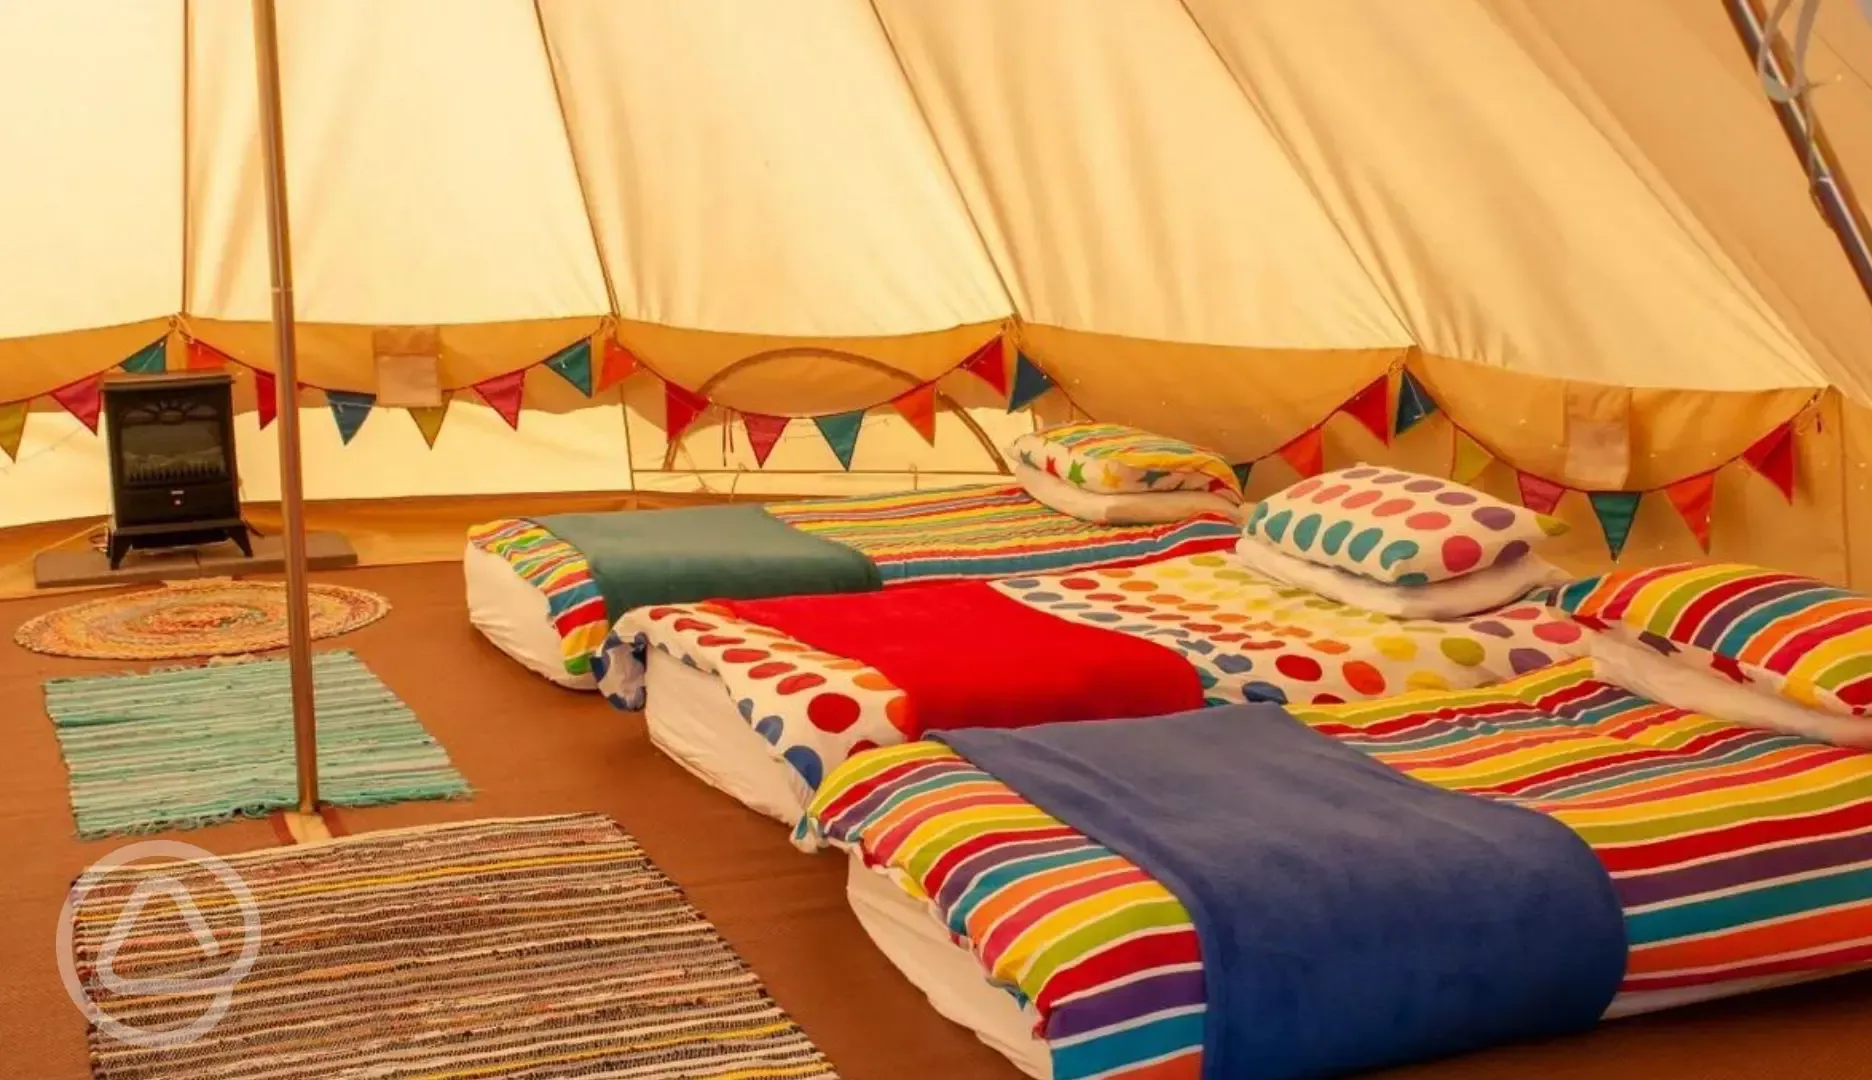 Beds in bell tent